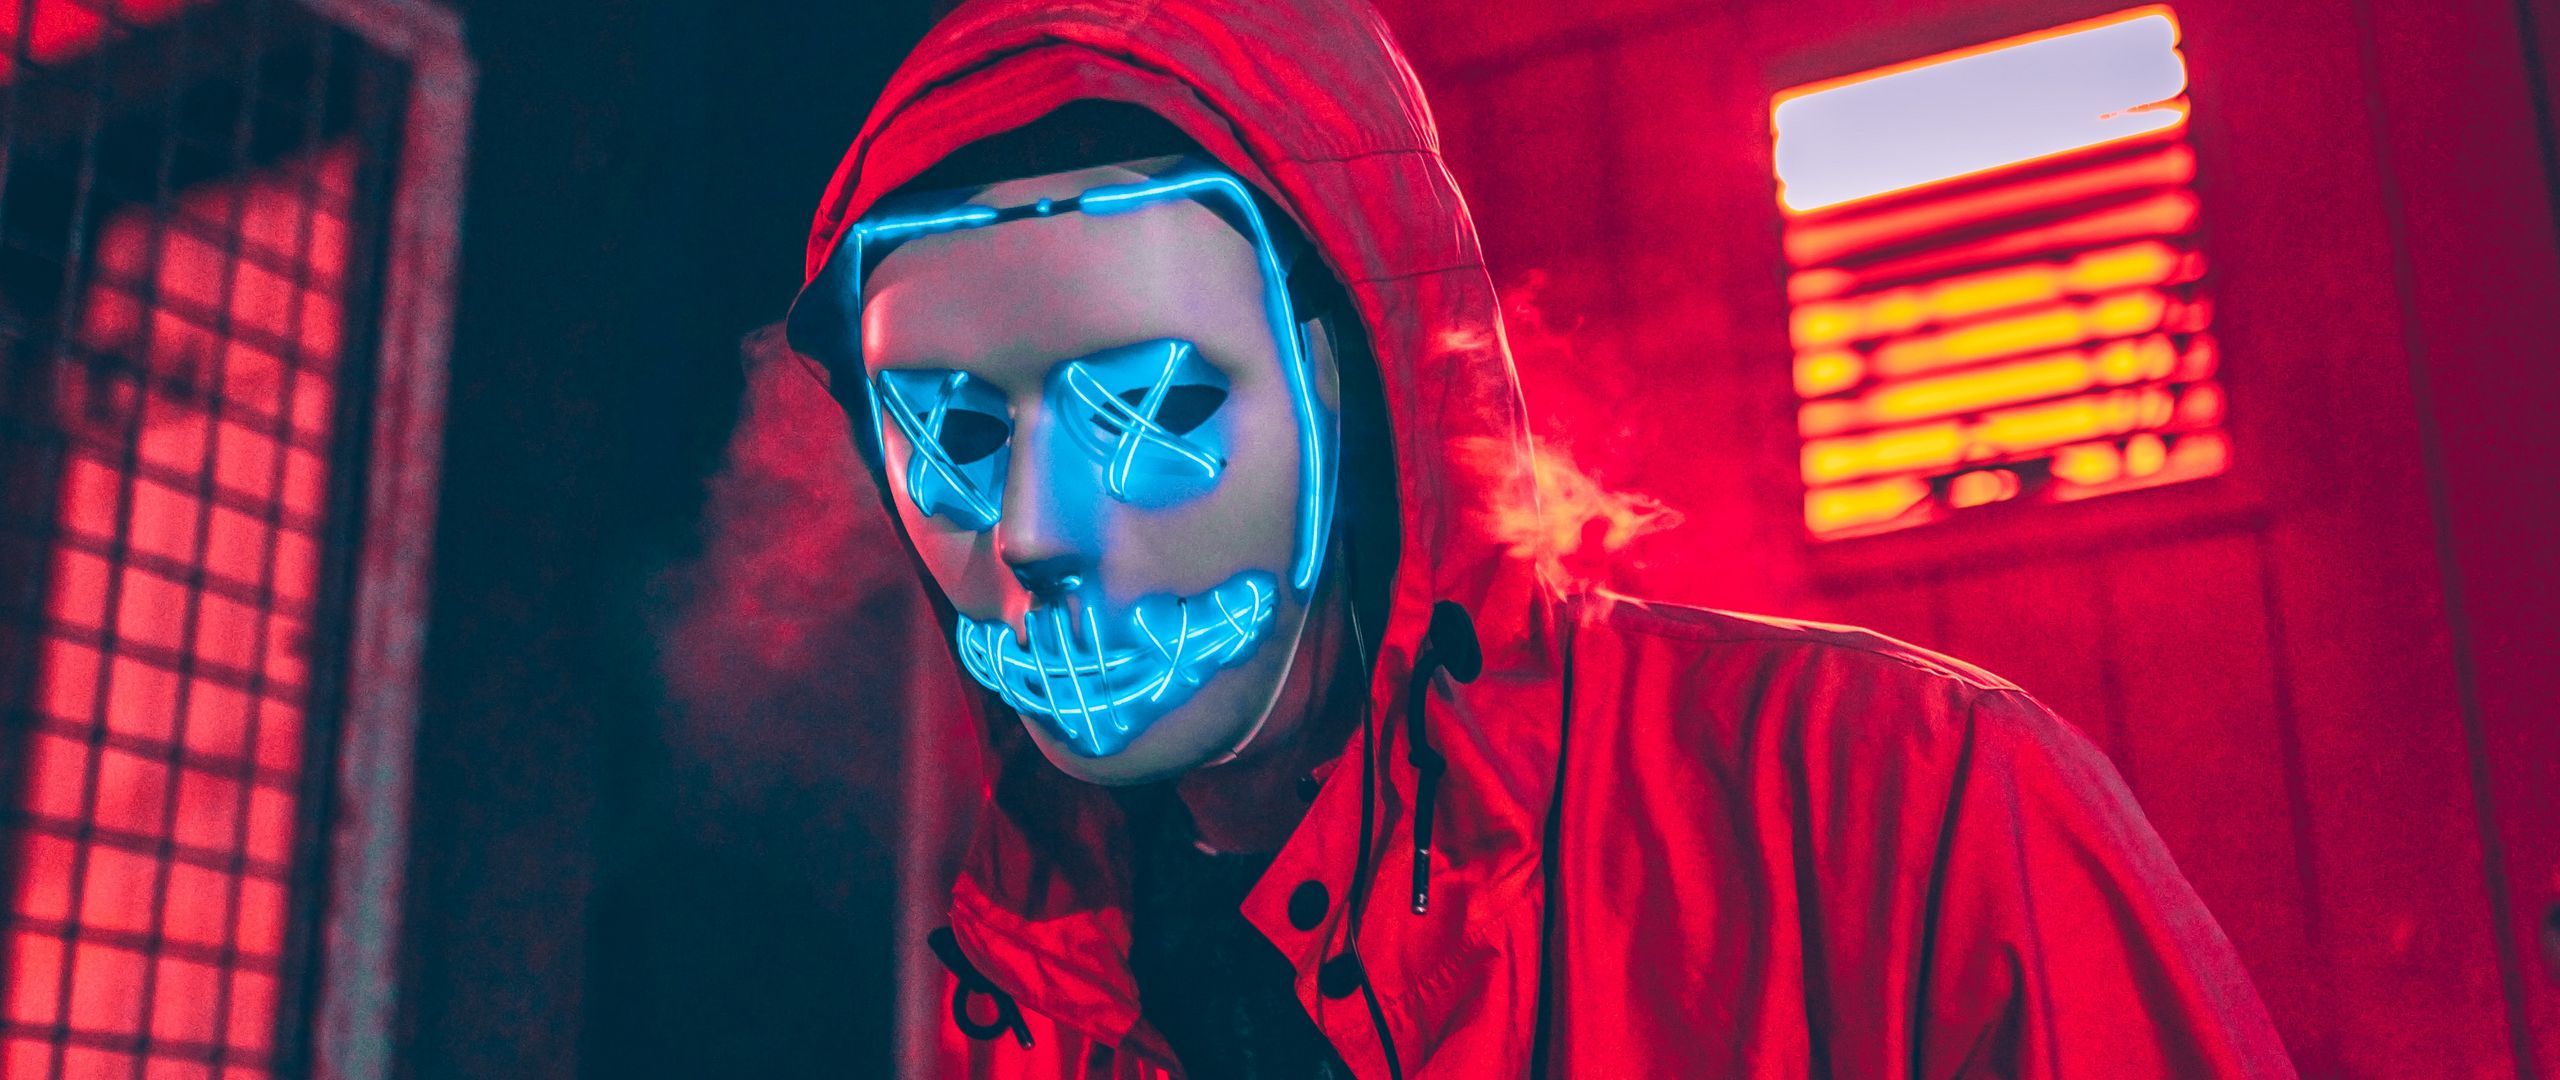 Download wallpaper 2560x1080 neon mask, mask, man, hood, red dual wide 1080p HD background